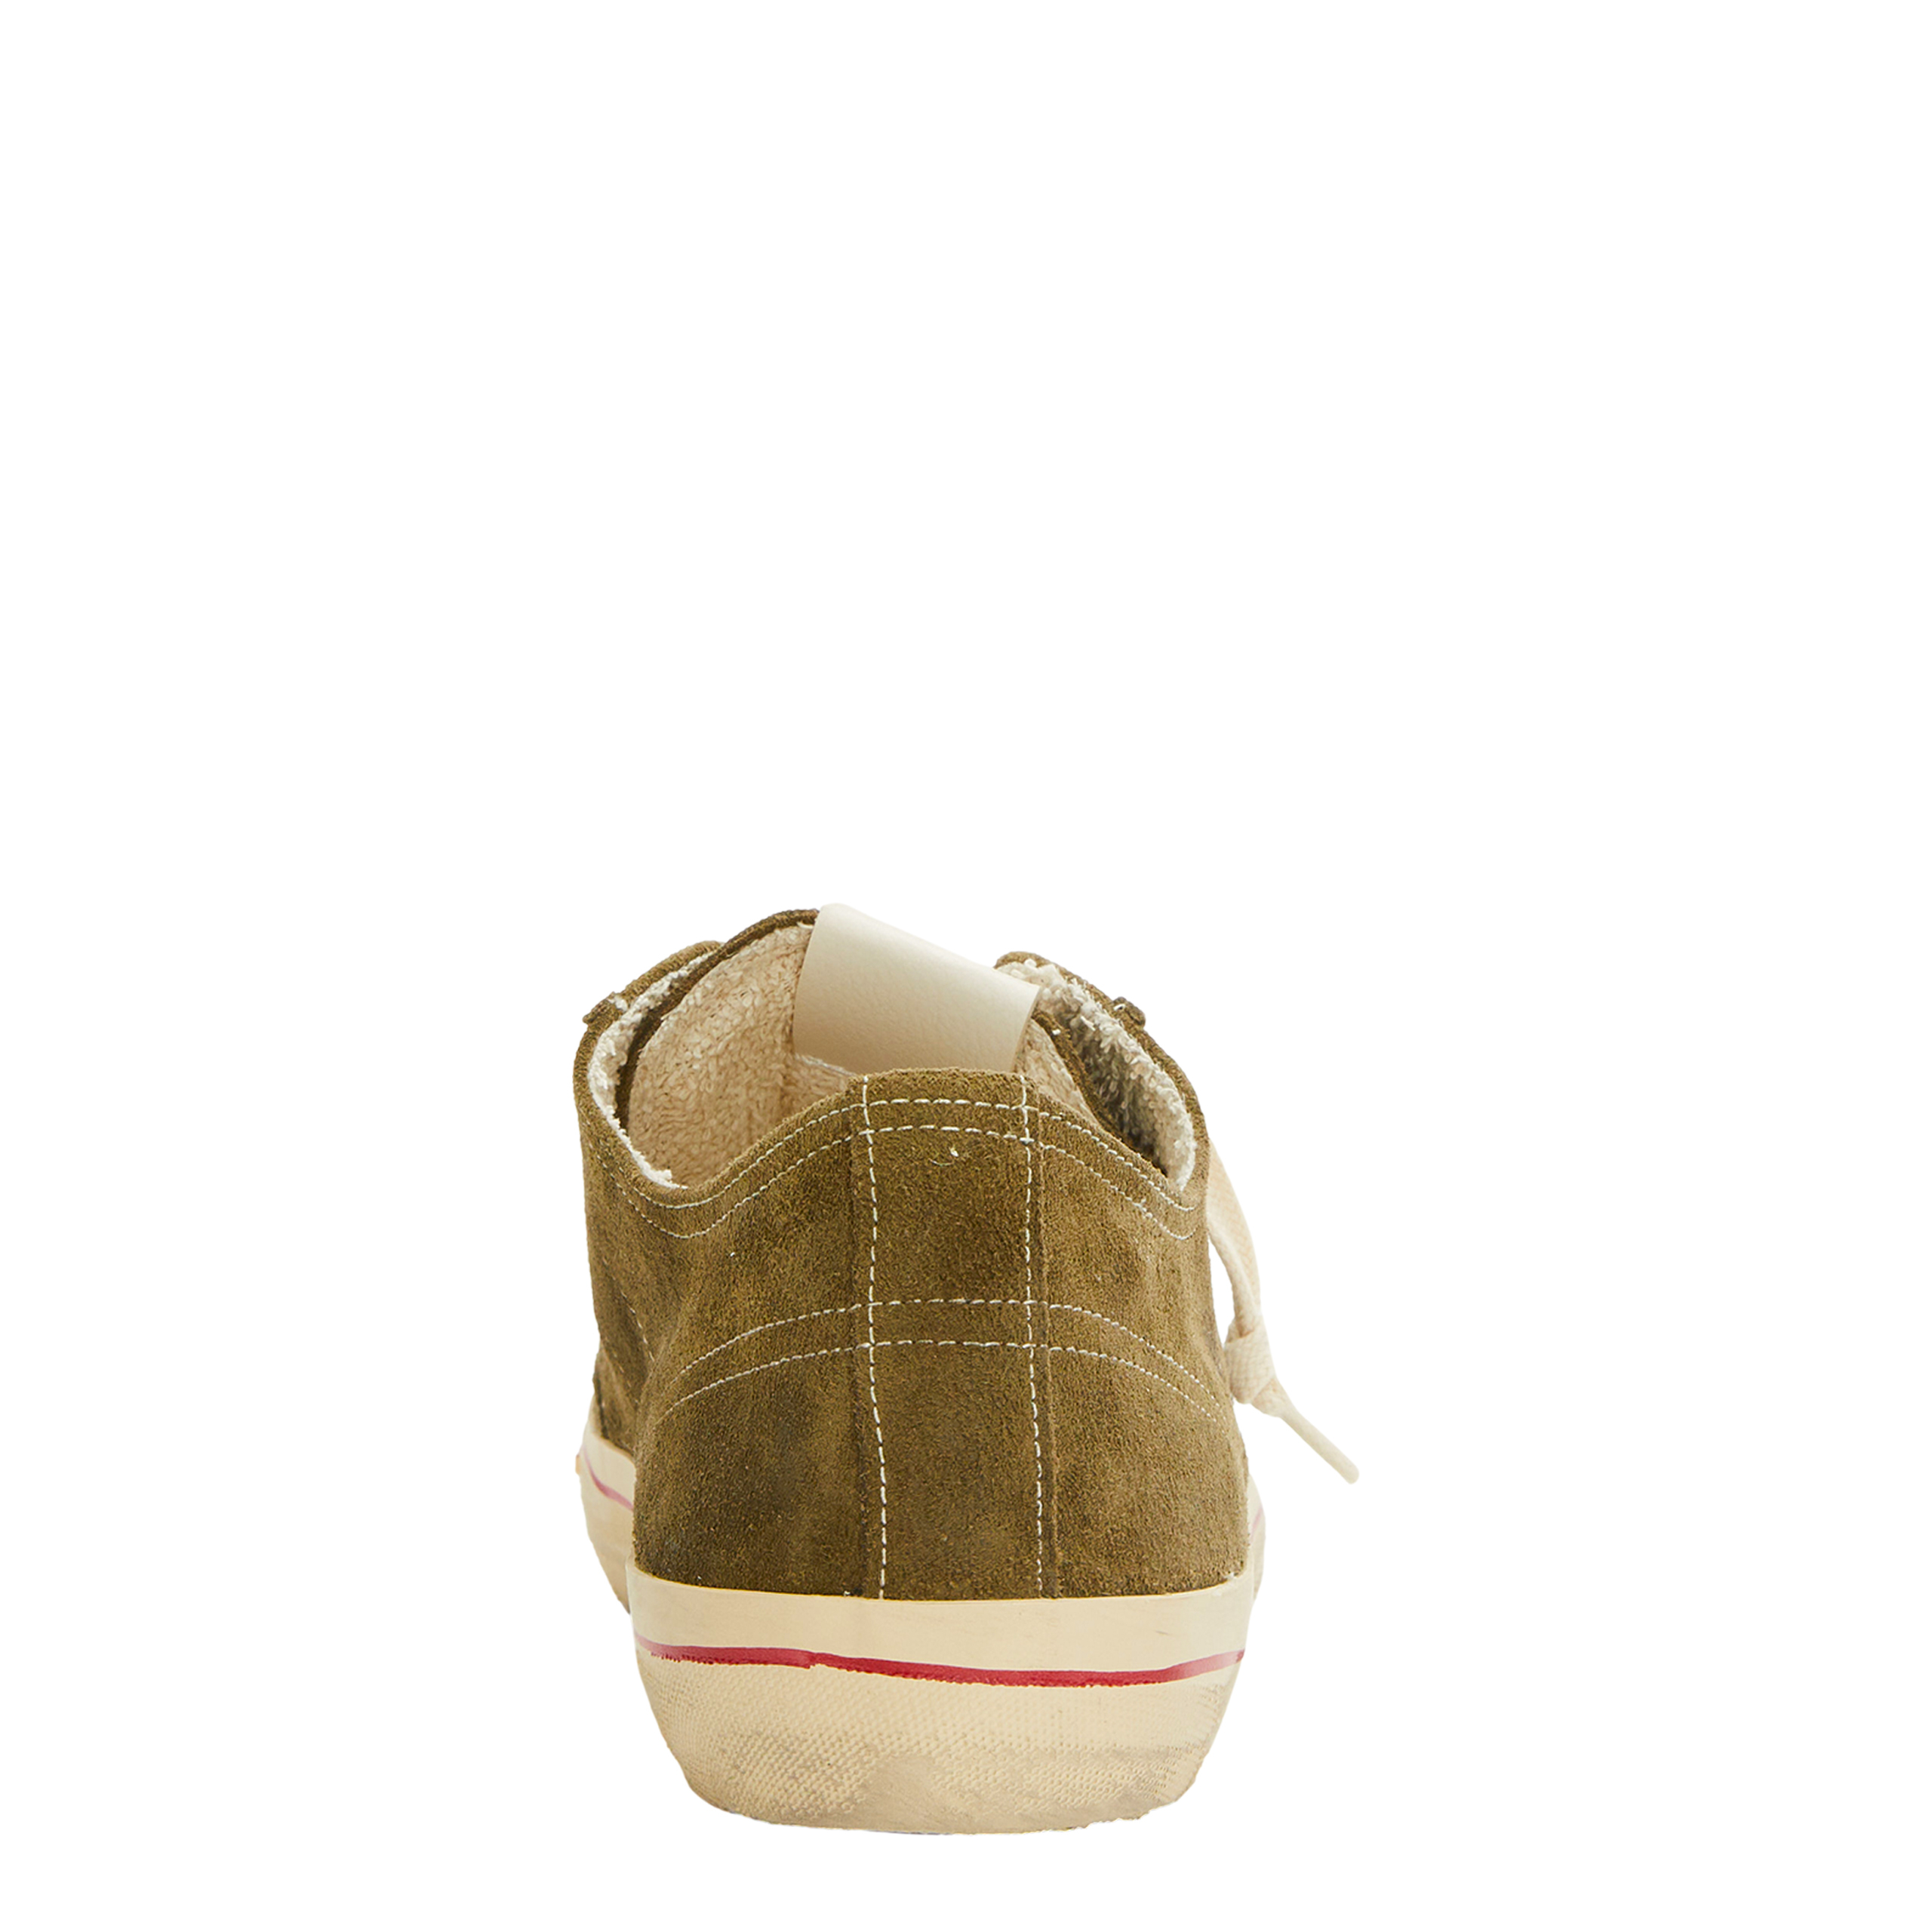 None Golden Goose Deluxe Brand GMF00129/F003417/35817, размер 39;40;41;42;43;44;45;46 GMF00129/F003417/35817 - фото 5